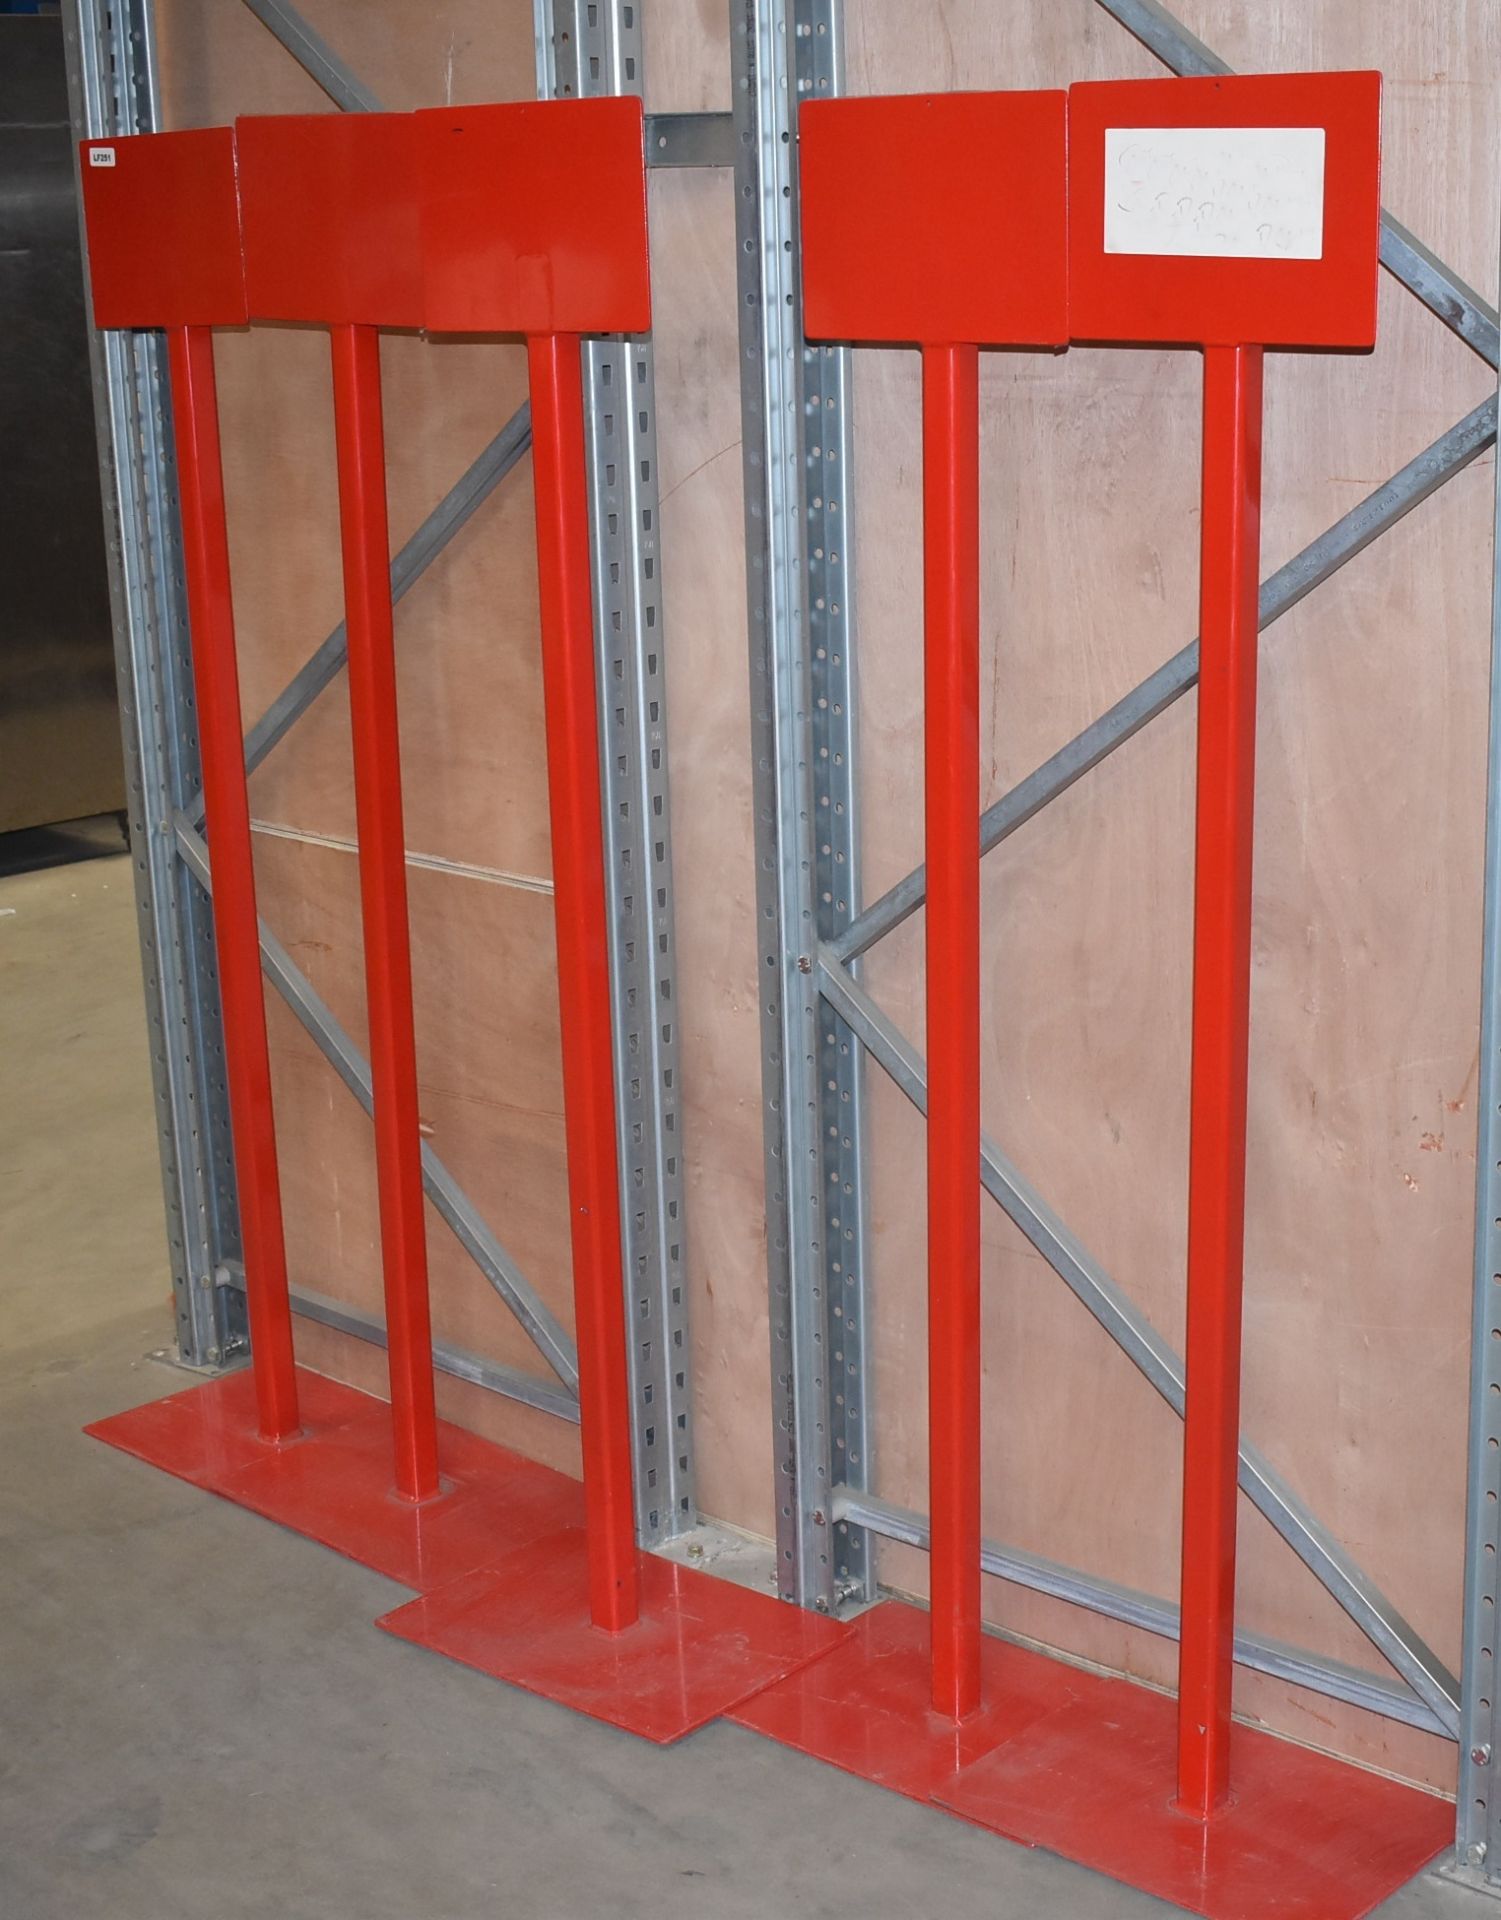 5 x Freestanding Heavy Duty Notice Stands in Red - Ideal For Social Distancing Warning Signs - - Image 6 of 7